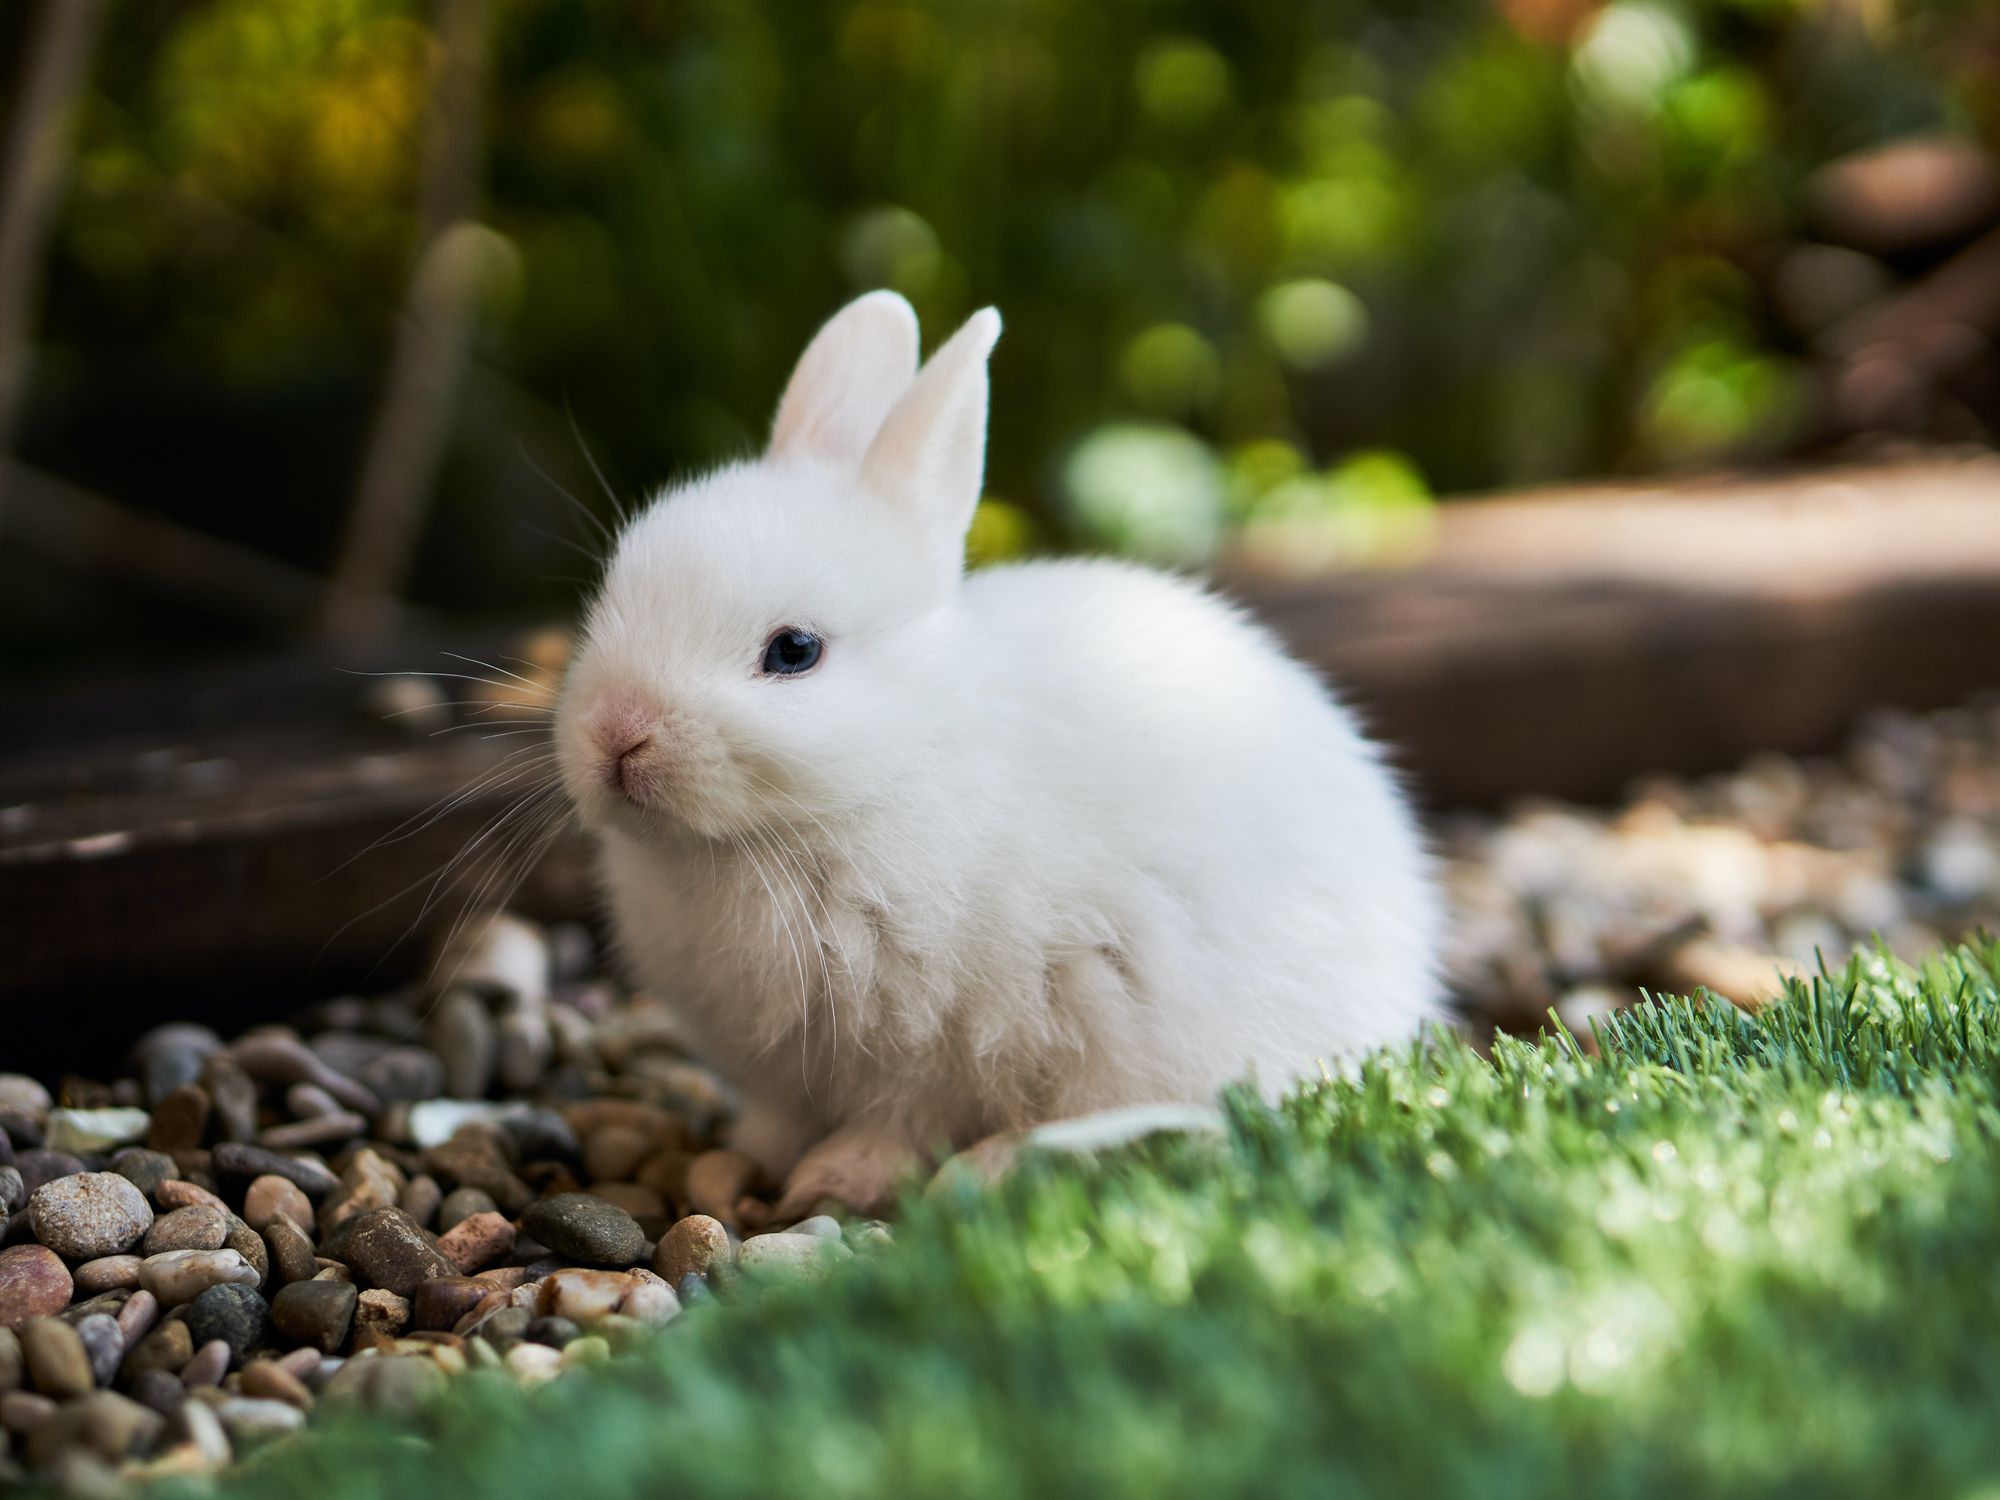 White bunny sitting on pebbles next to a patch of grass.